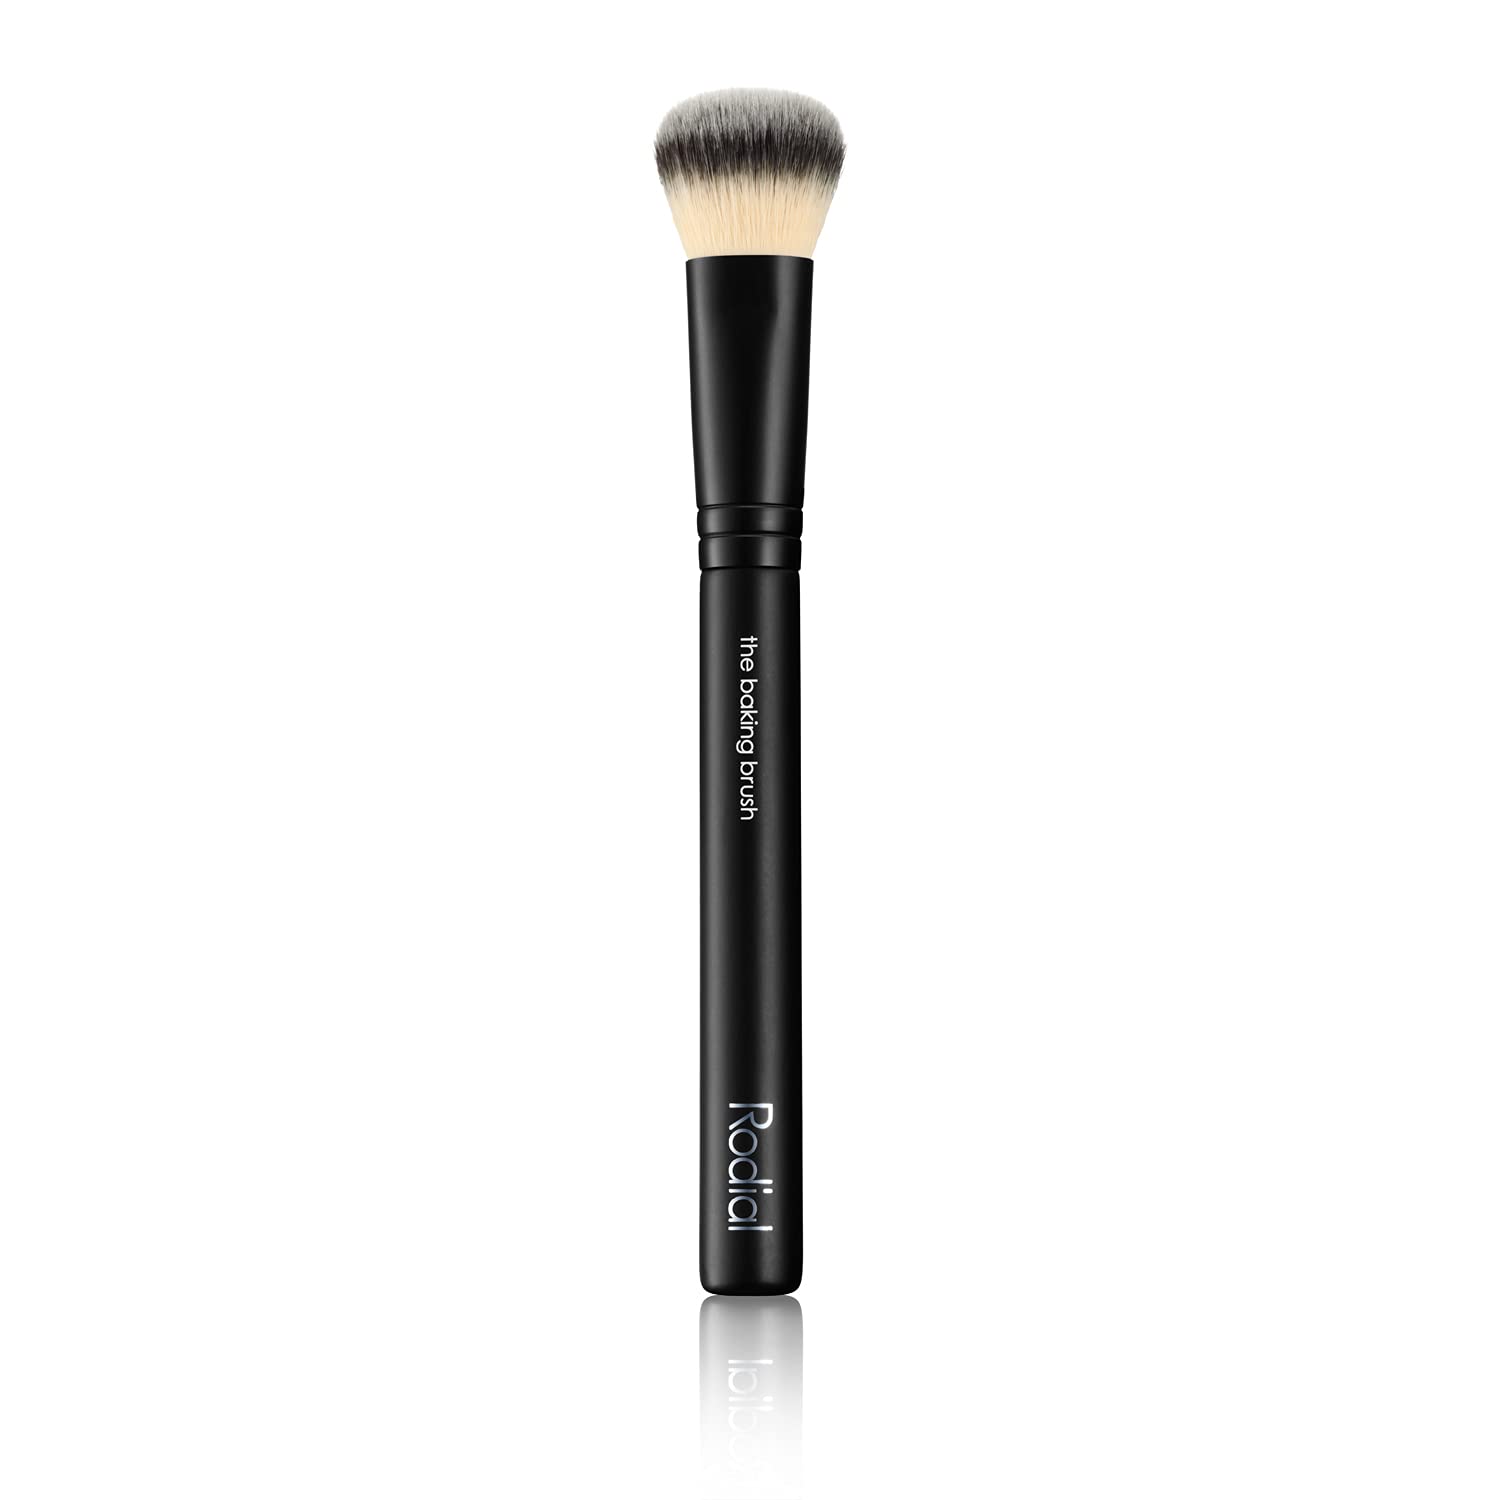 Rodial The Buffing Brush for a Seamless, Smooth, Even Skin Finish - Makeup Brush for Blending Primer, Concealer and Foundation - Buffing Brush for Naturally Perfected, Professional Look